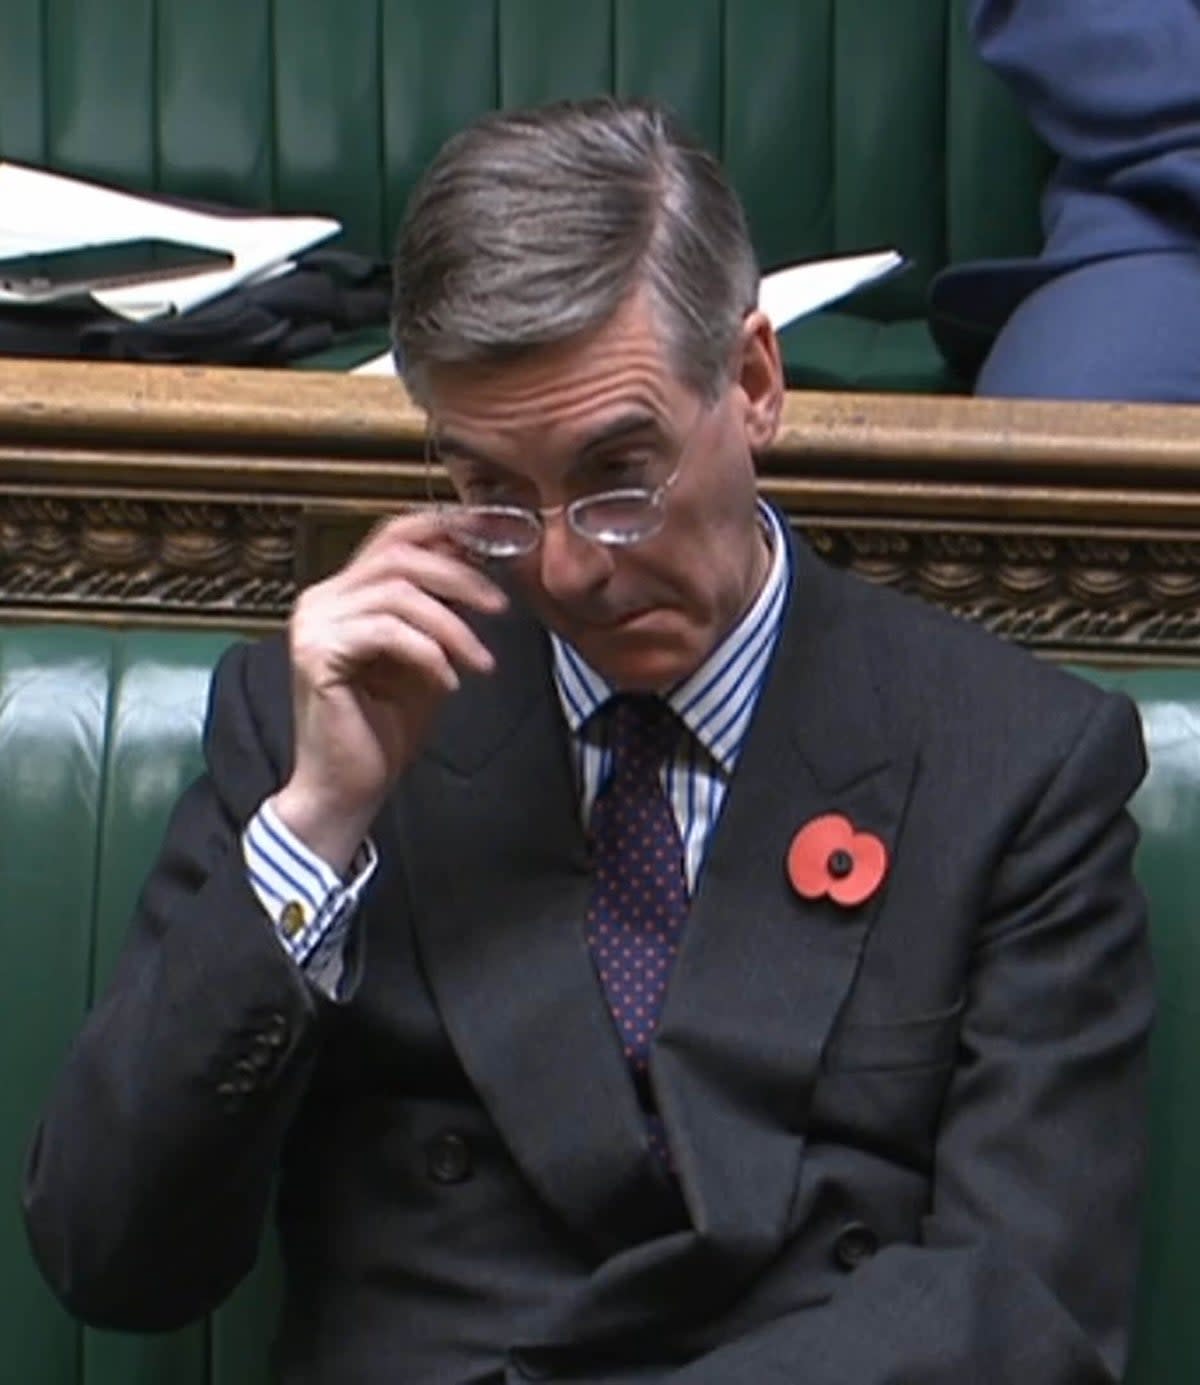 Jacob Rees-Mogg unveiled moves to cut regulations imported from EU but will not say how much Brexit has harmed UK’s economy  (PA Archive)